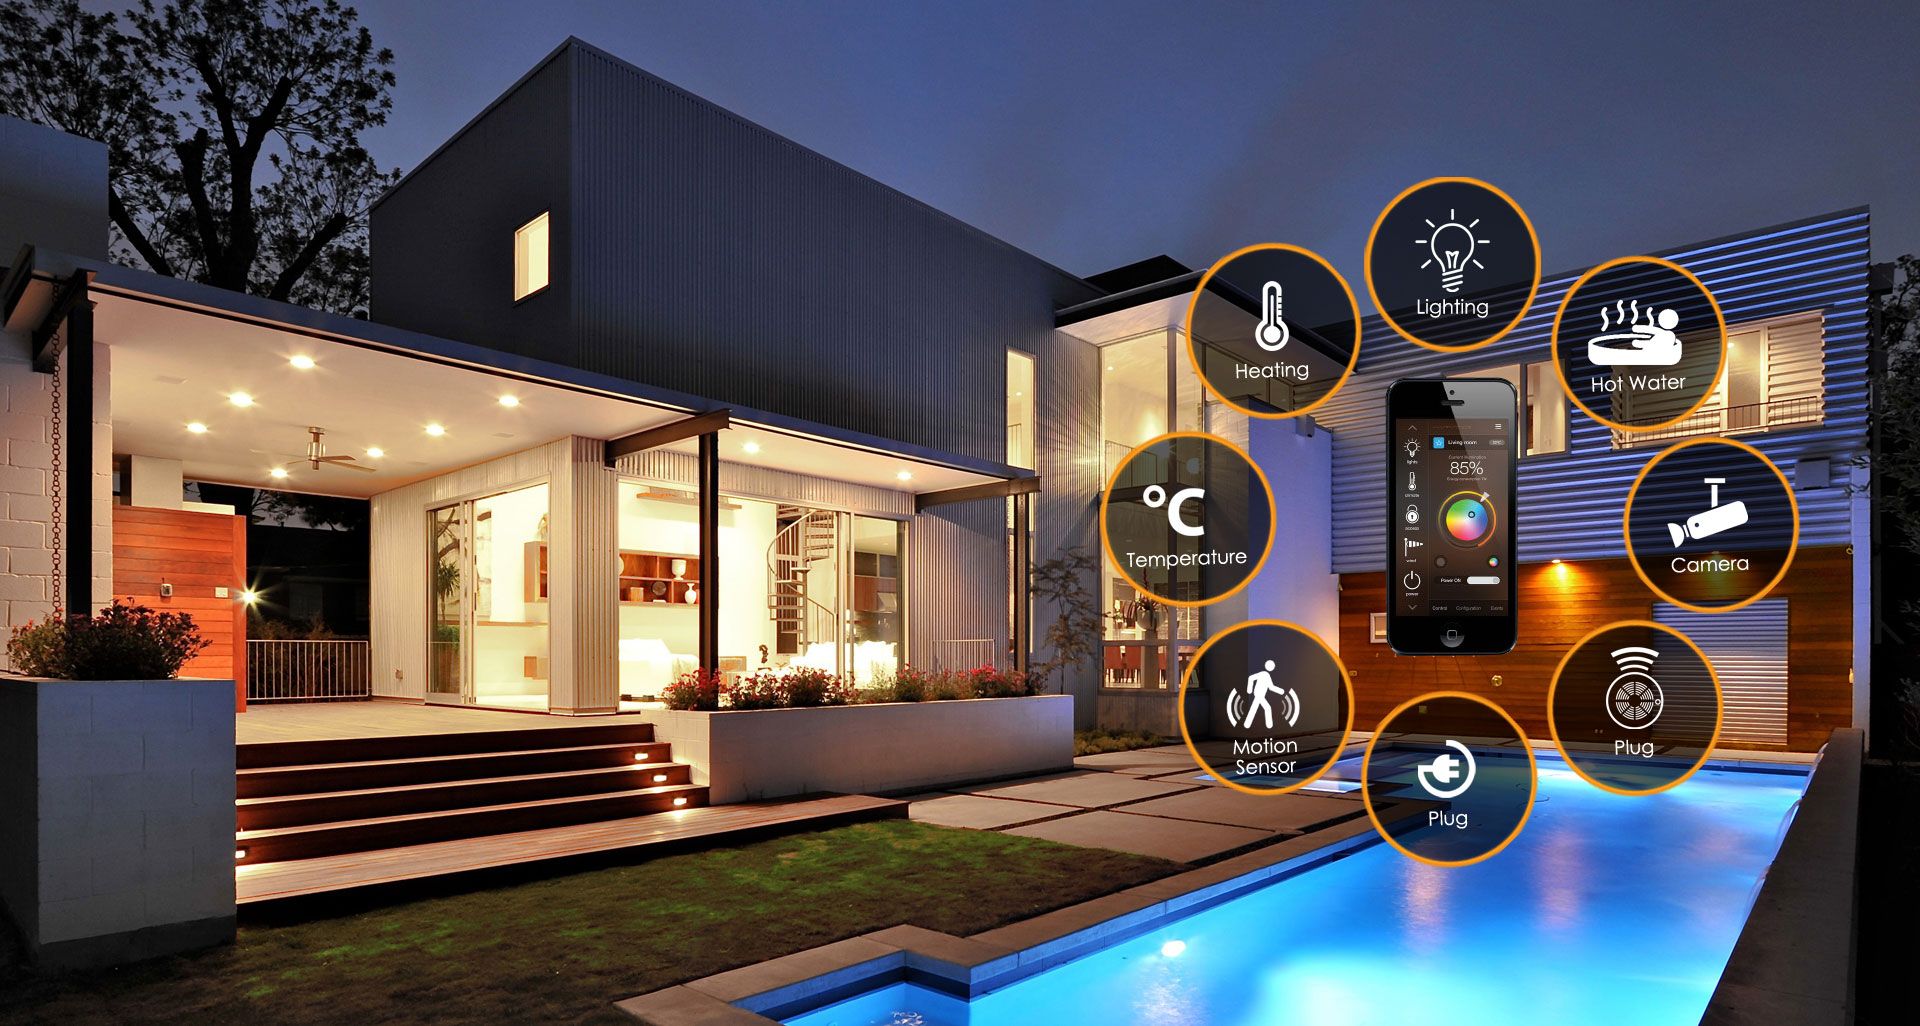 The Role of Smart Home Technology in Luxury Living